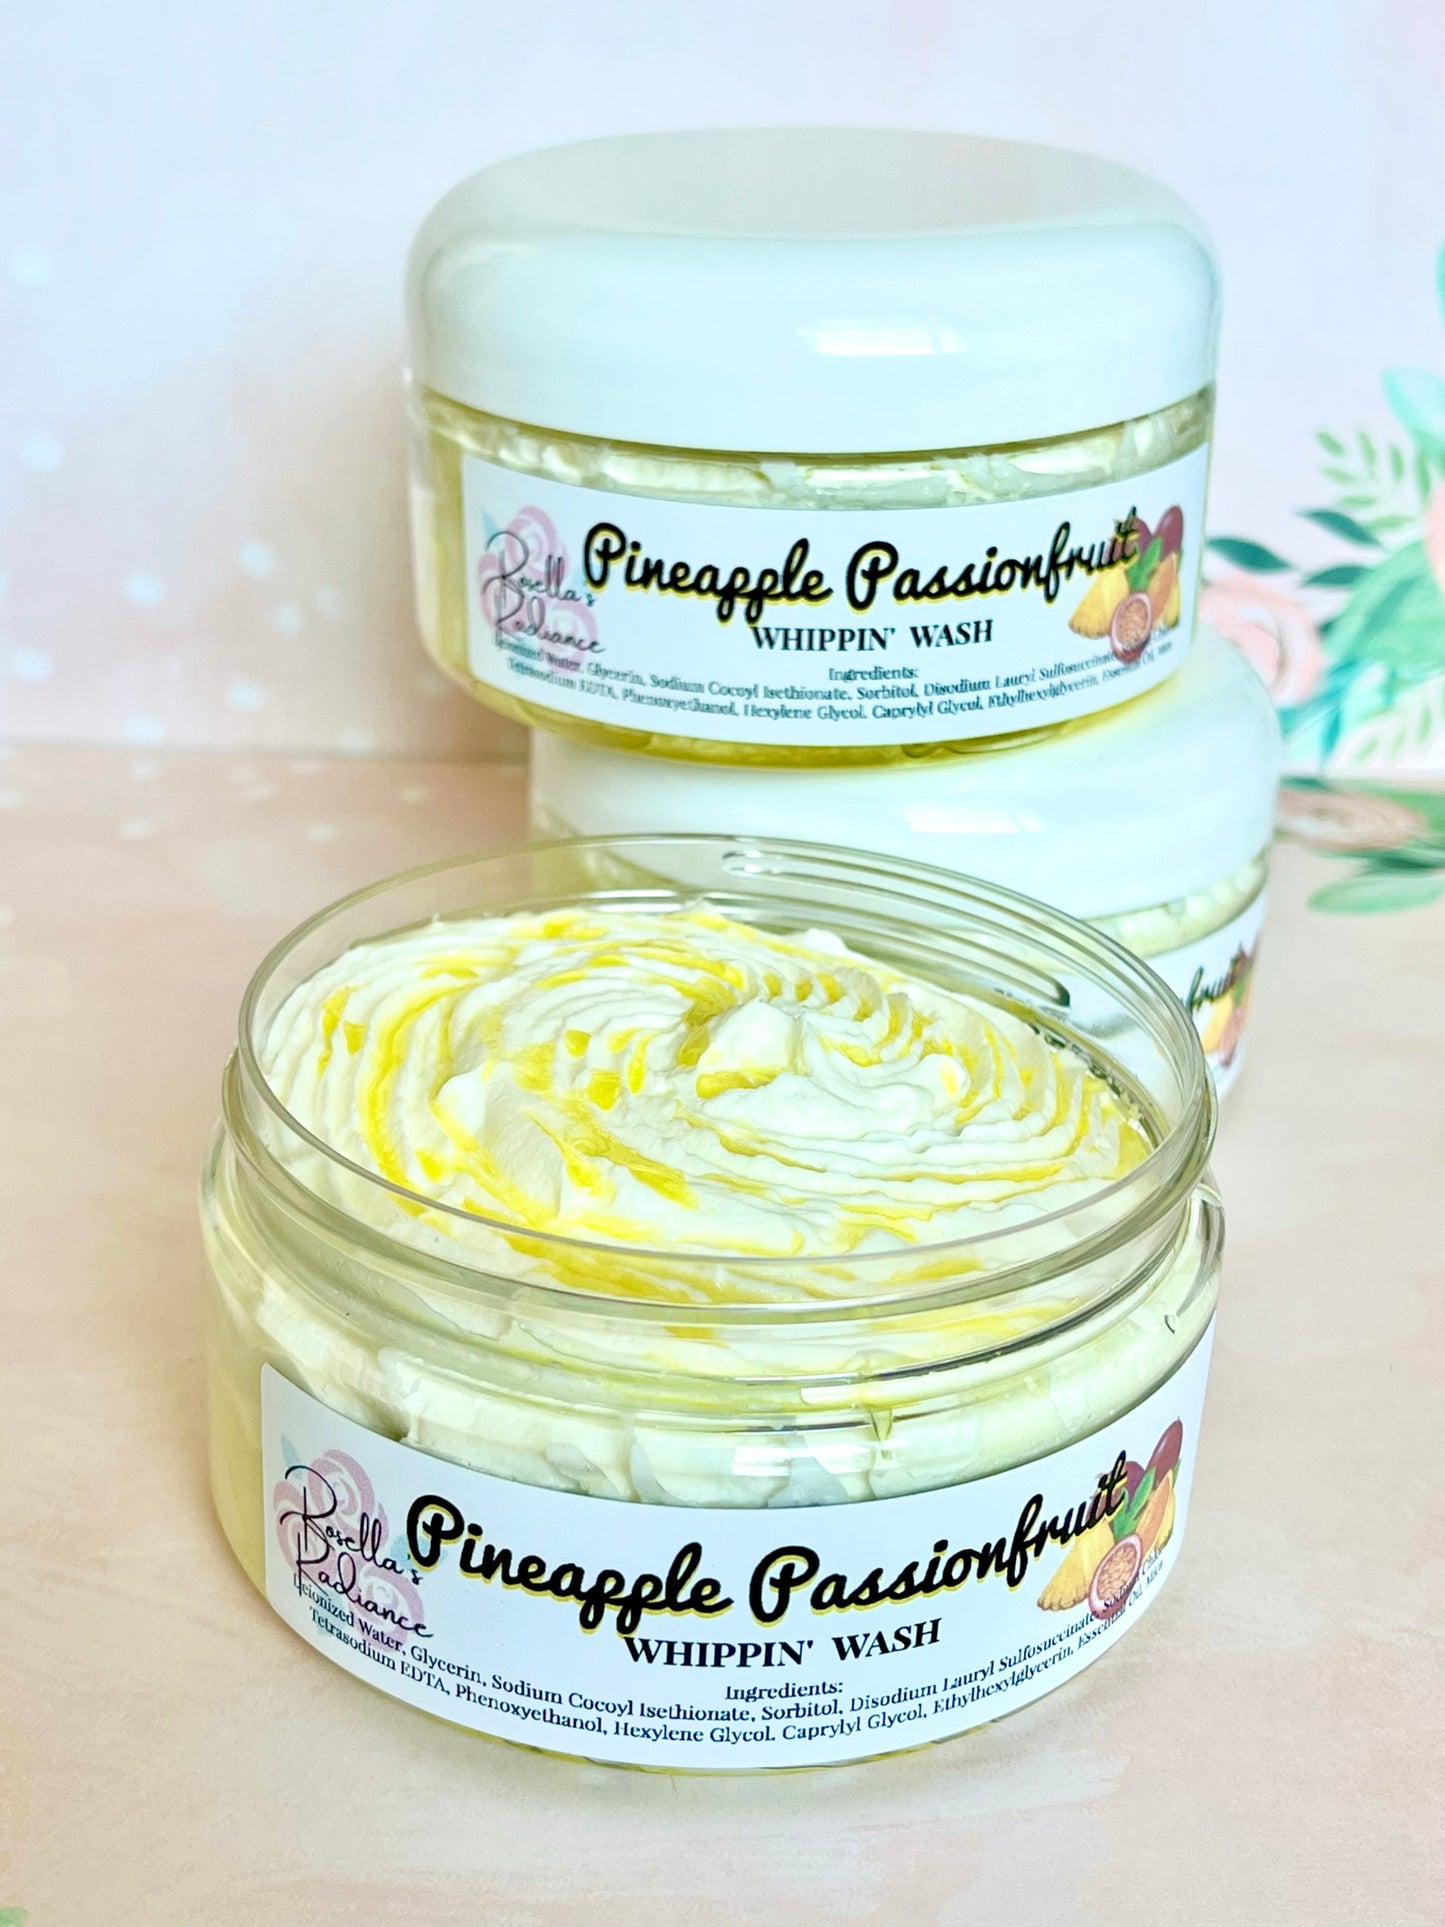 Pineapple Passionfruit Whippin' Wash